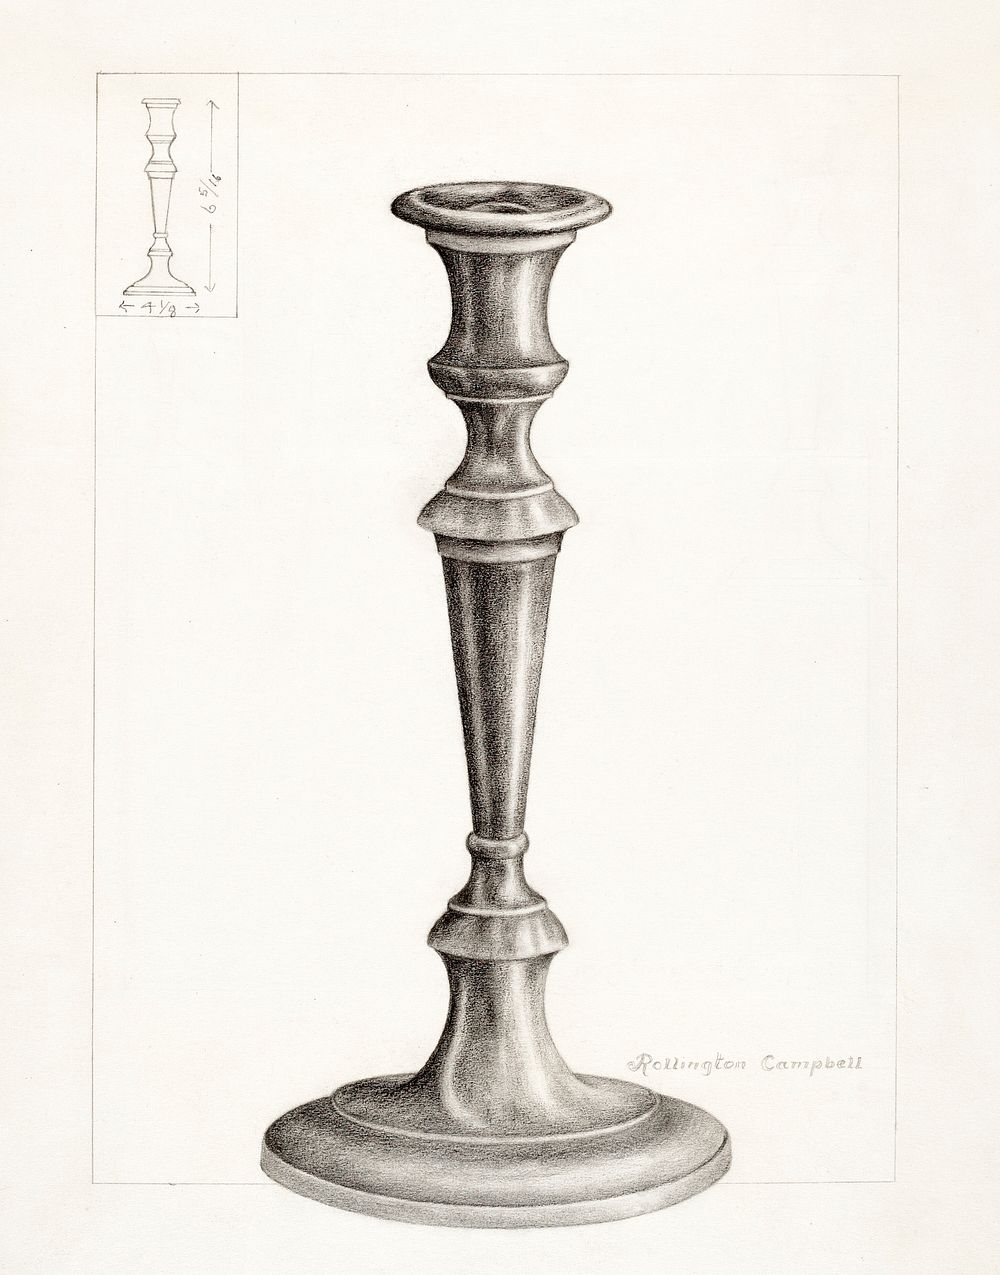 Candlestick (ca.1936) by Rollington Campbell. Original from The National Gallery of Art. Digitally enhanced by rawpixel.